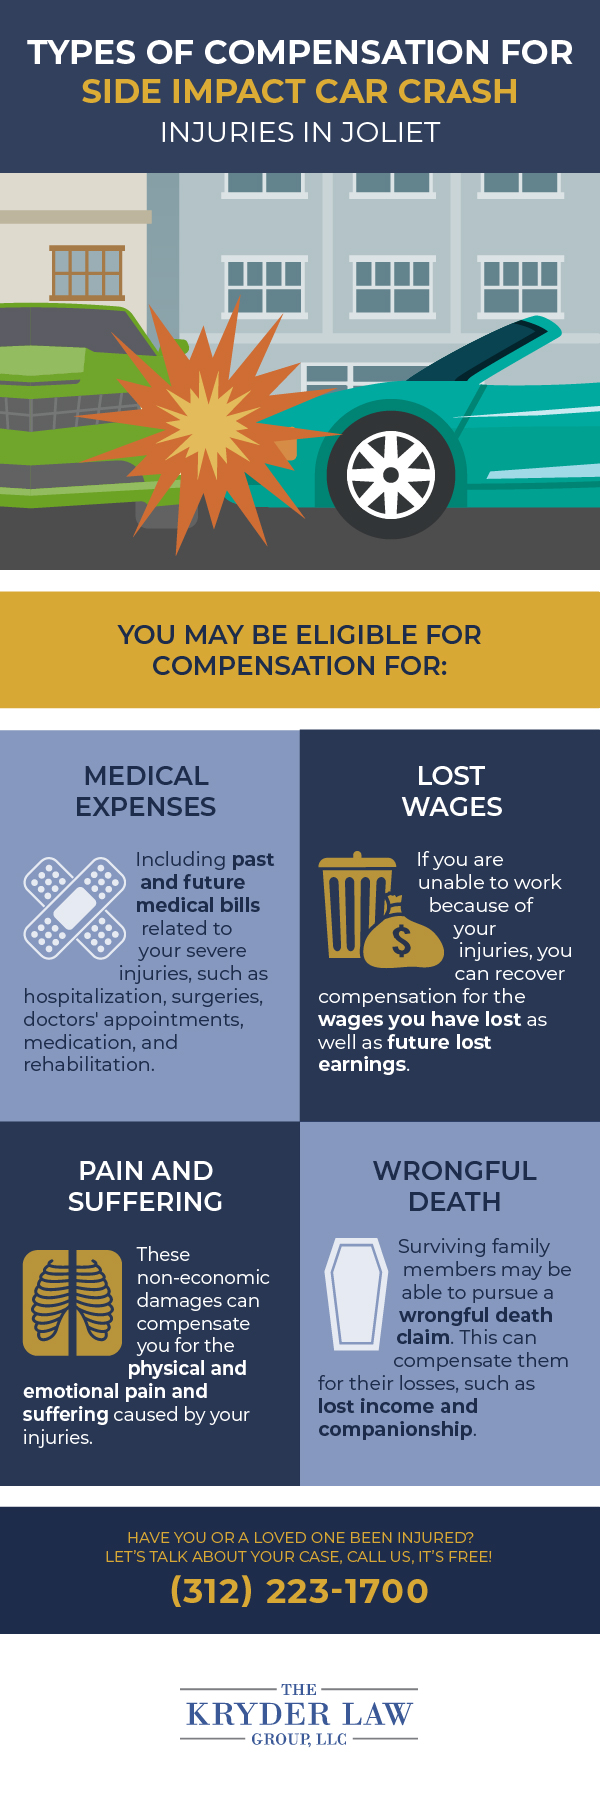 Types of Compensation for Side Impact Car Crash Injuries in Joliet Infographic